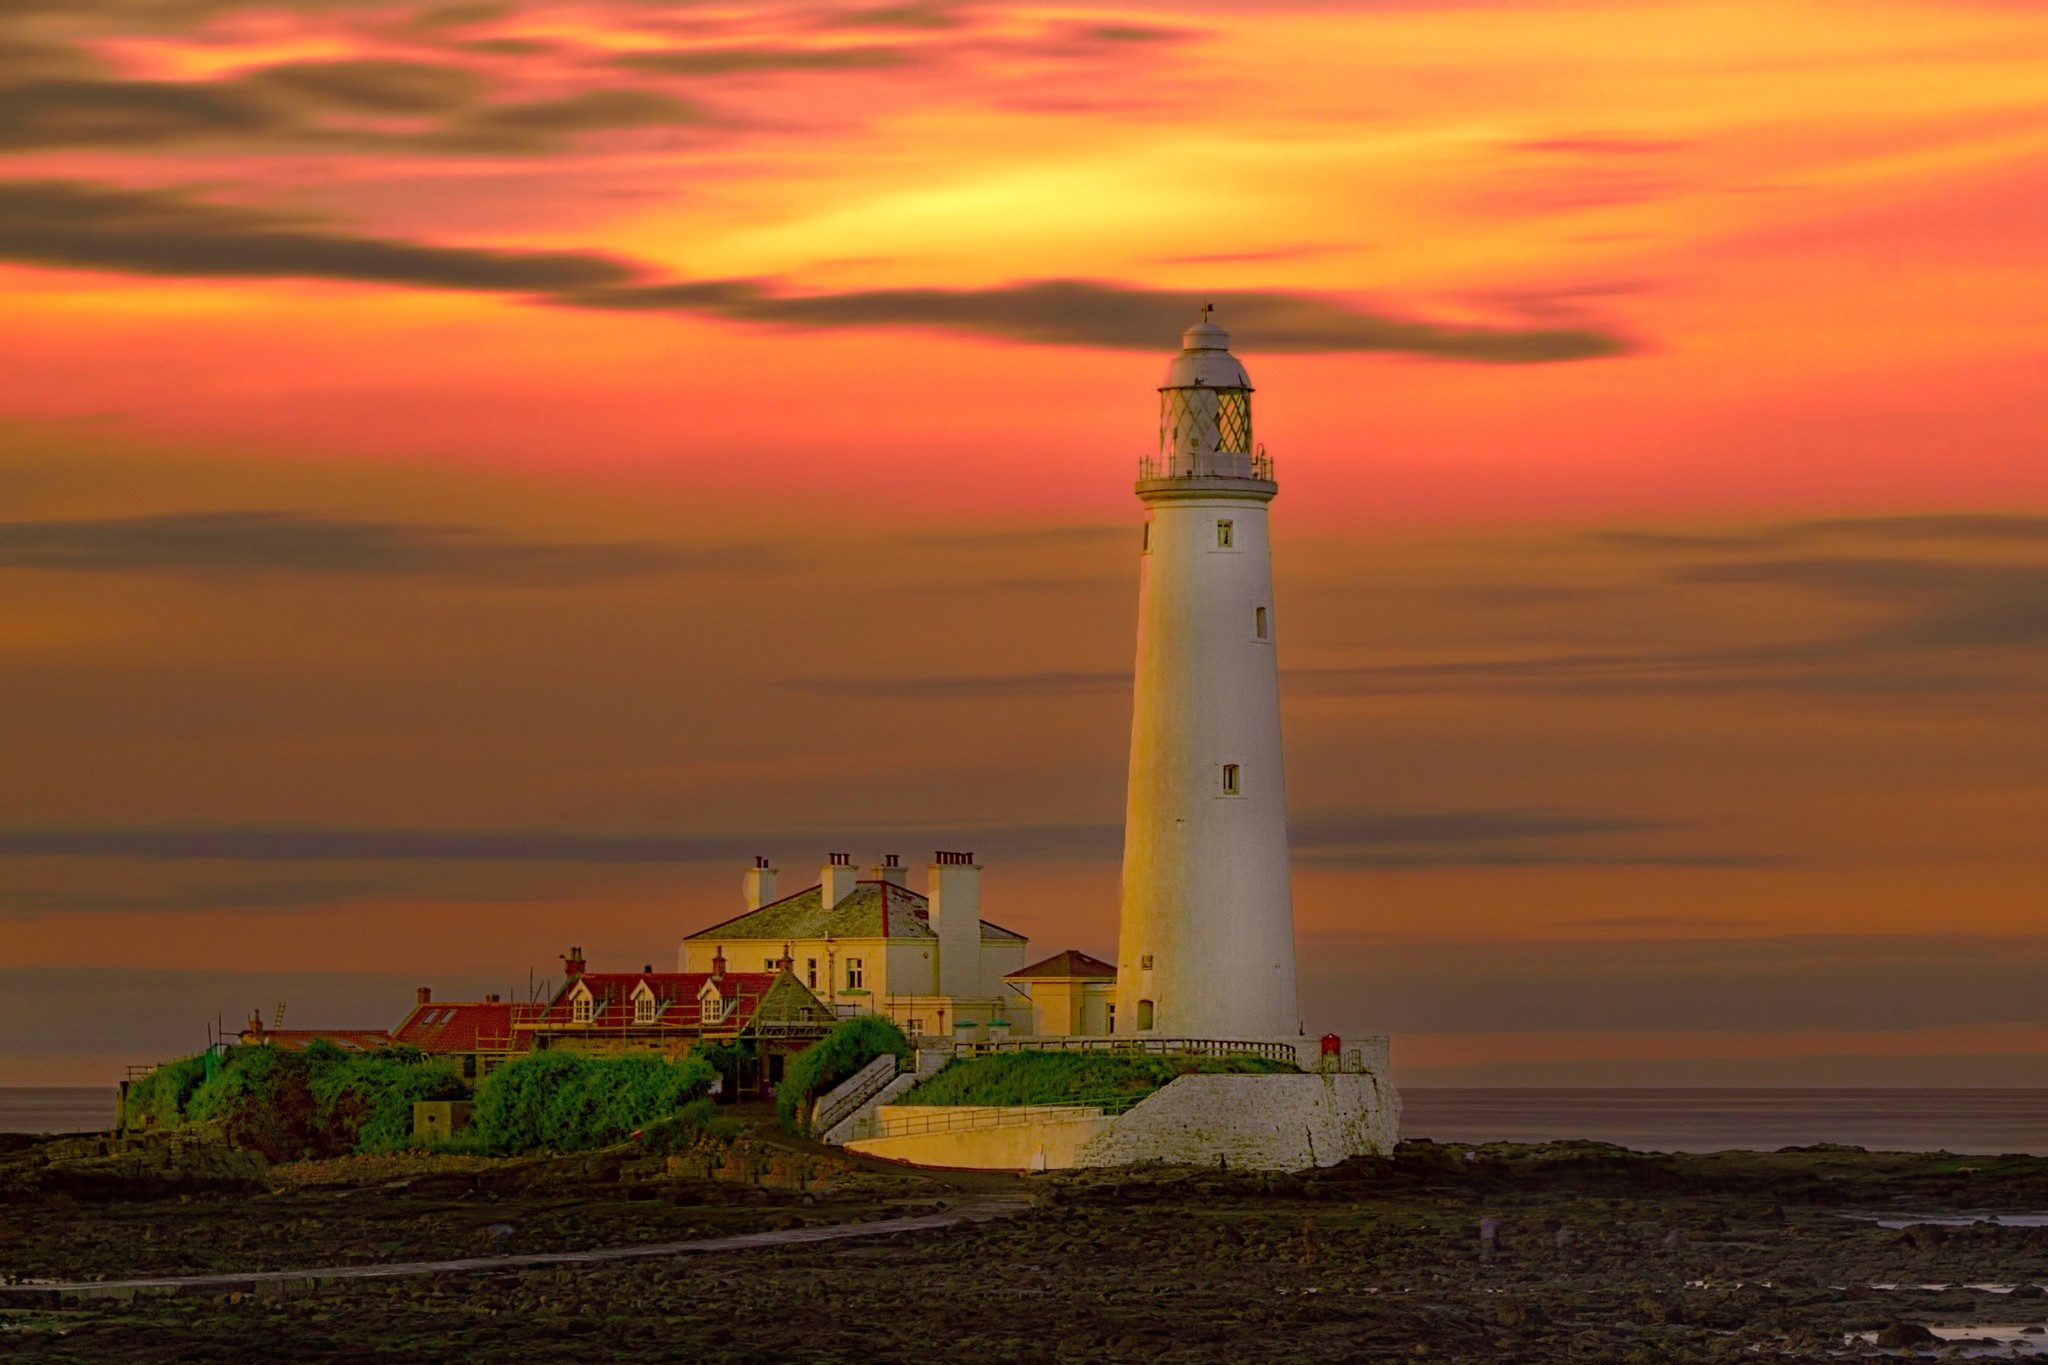 Picturesque lighthouses, Wallpaper collection, Beautiful scenery, Serene landscapes, 2050x1370 HD Desktop